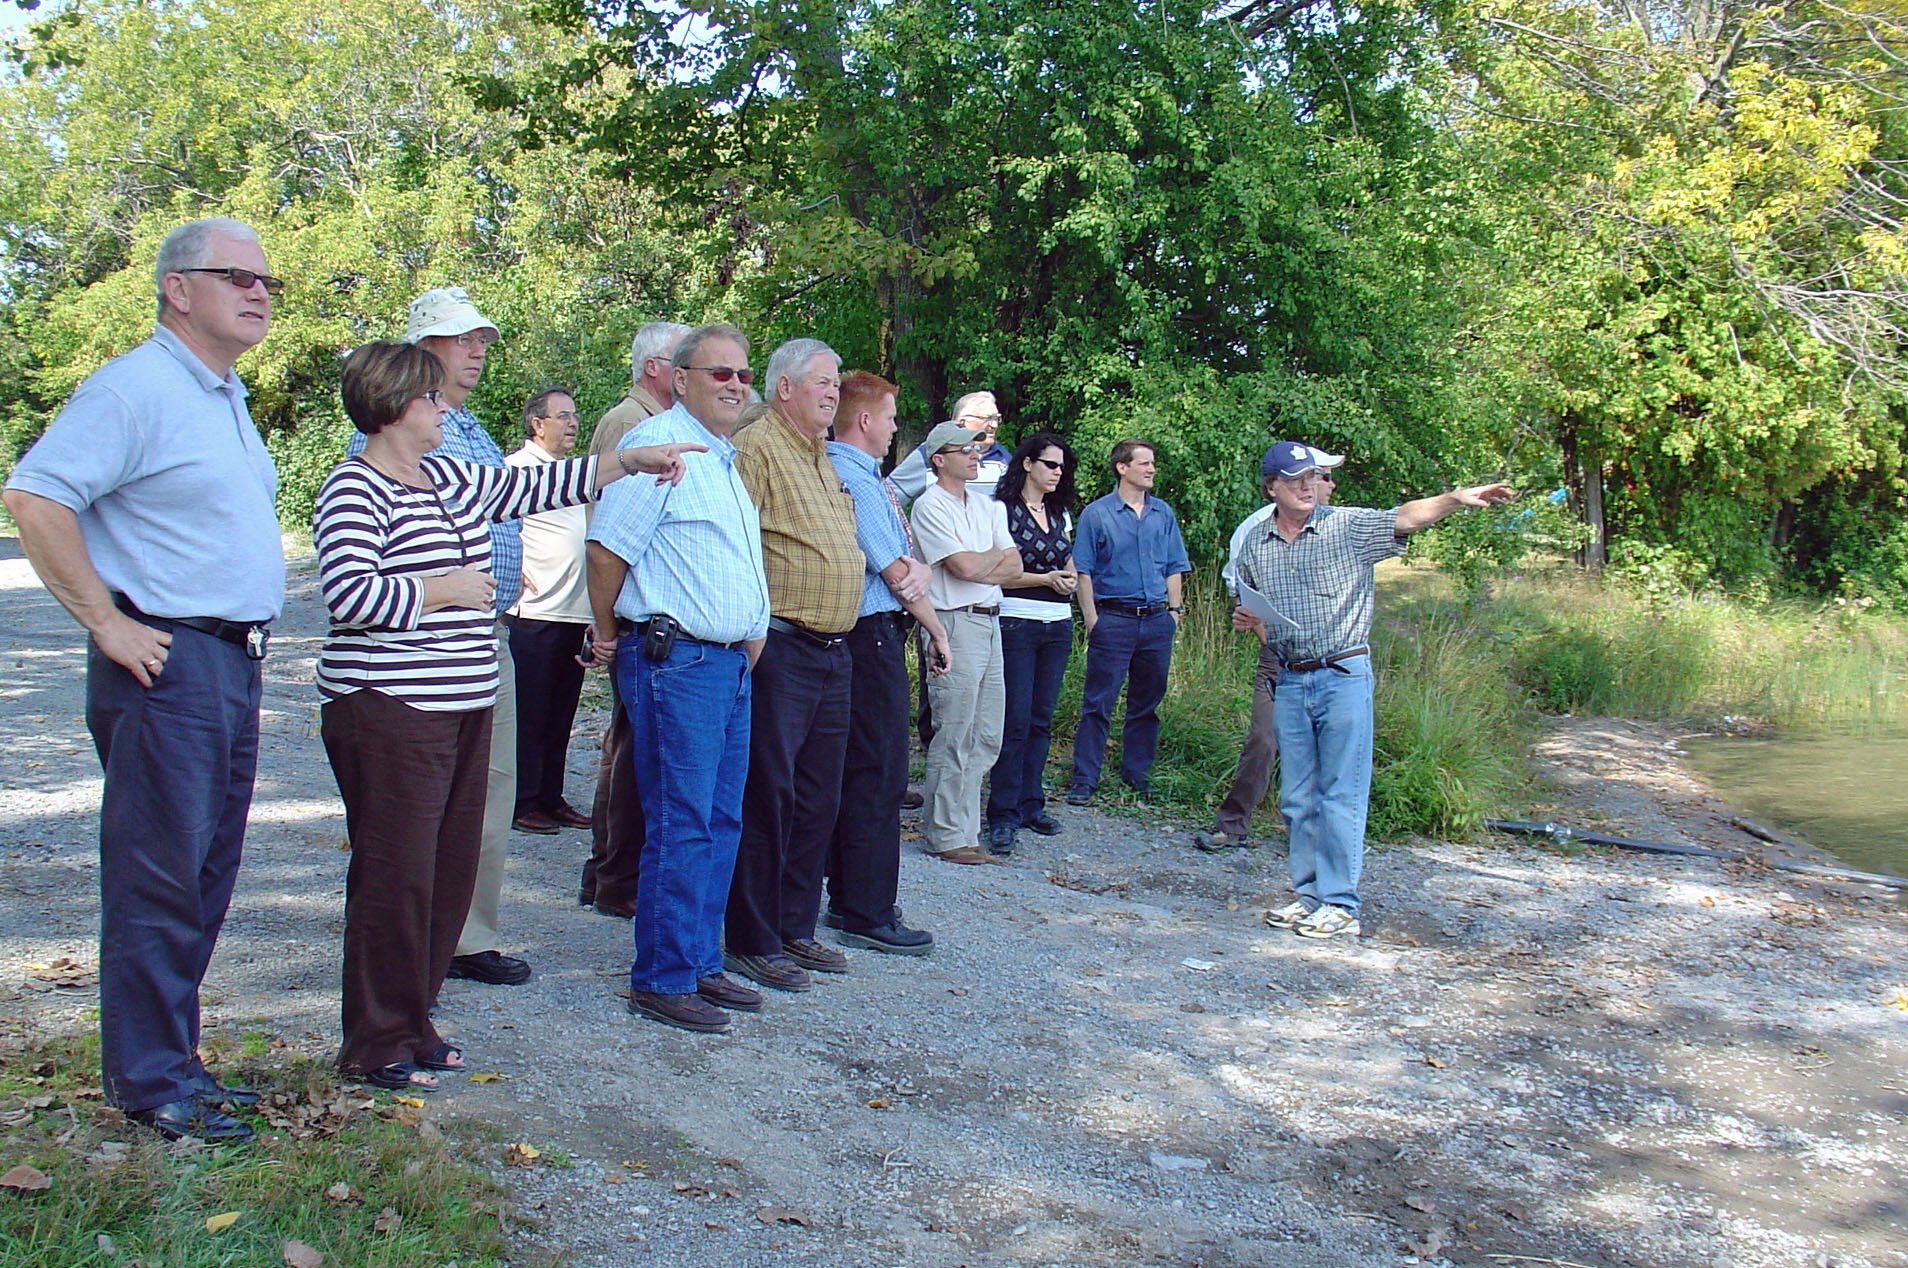 The Quinte Region Source Protection Committee visits Roblin Lake